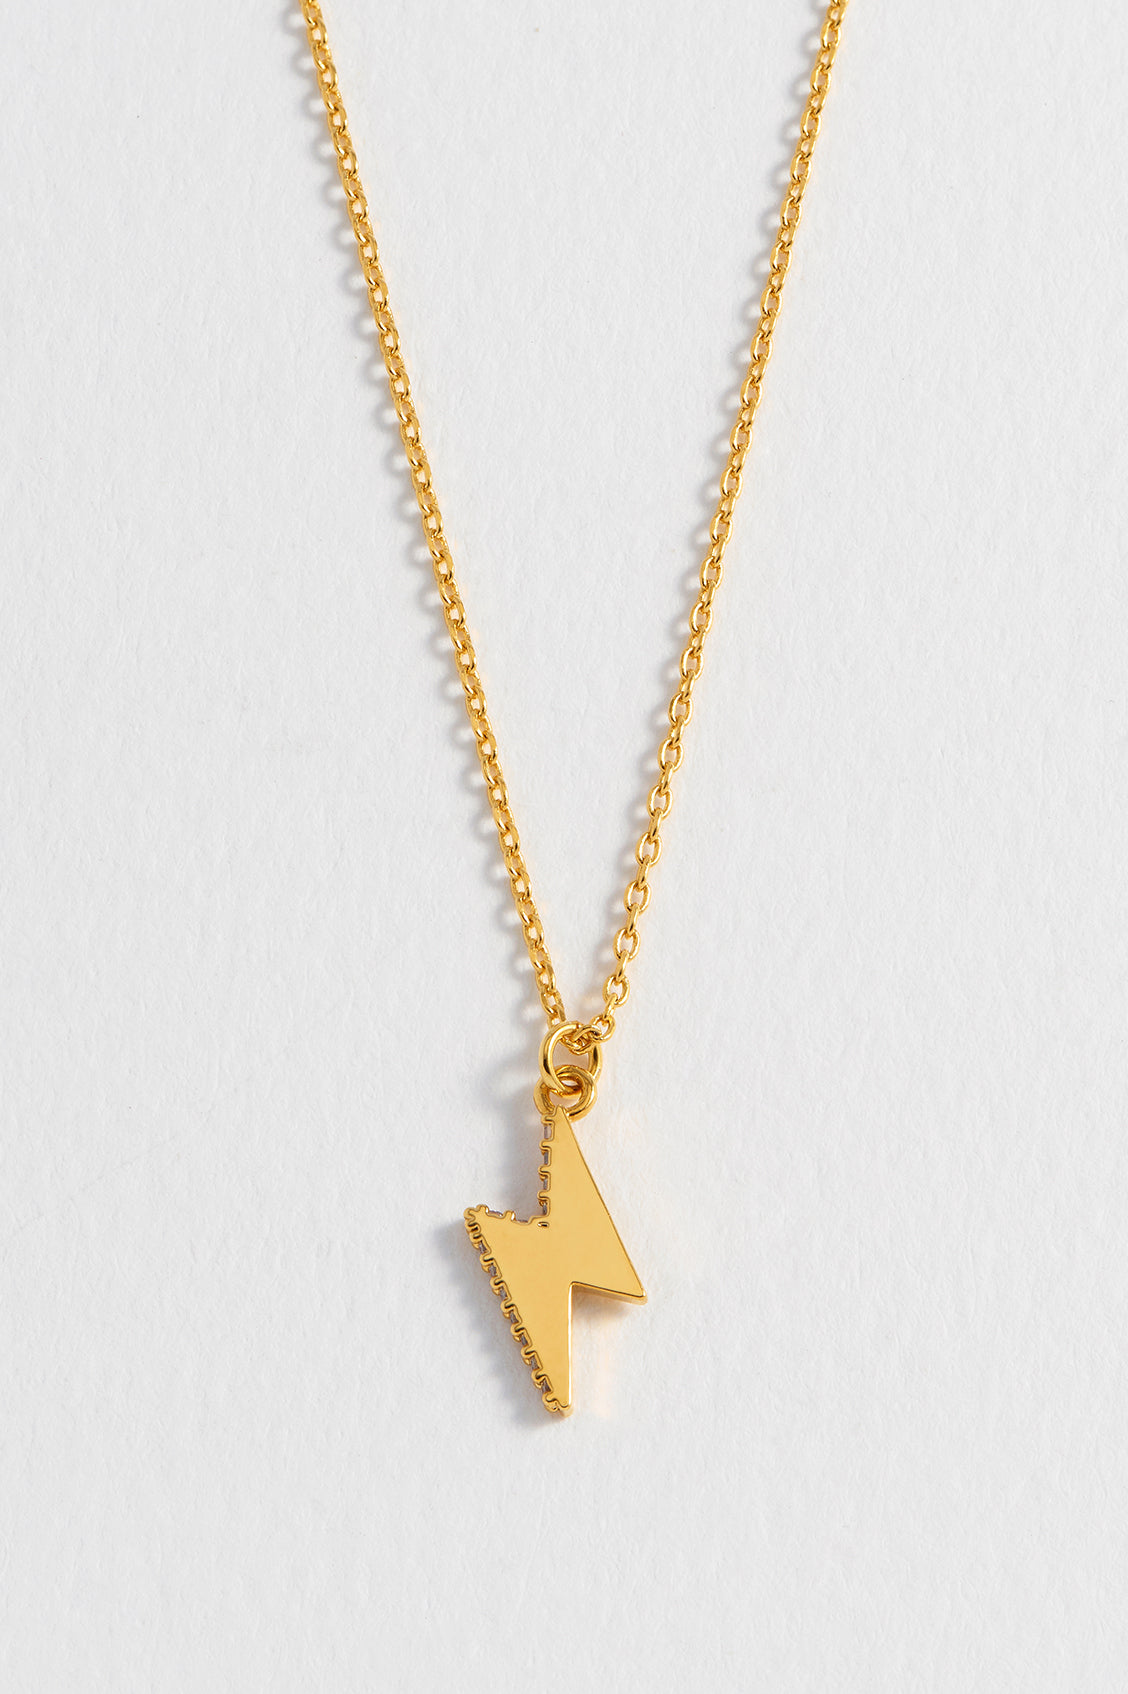 Gold Sparkling Lightning Bolt Necklace With Slider Clasp | Scream Pretty |  Wolf & Badger